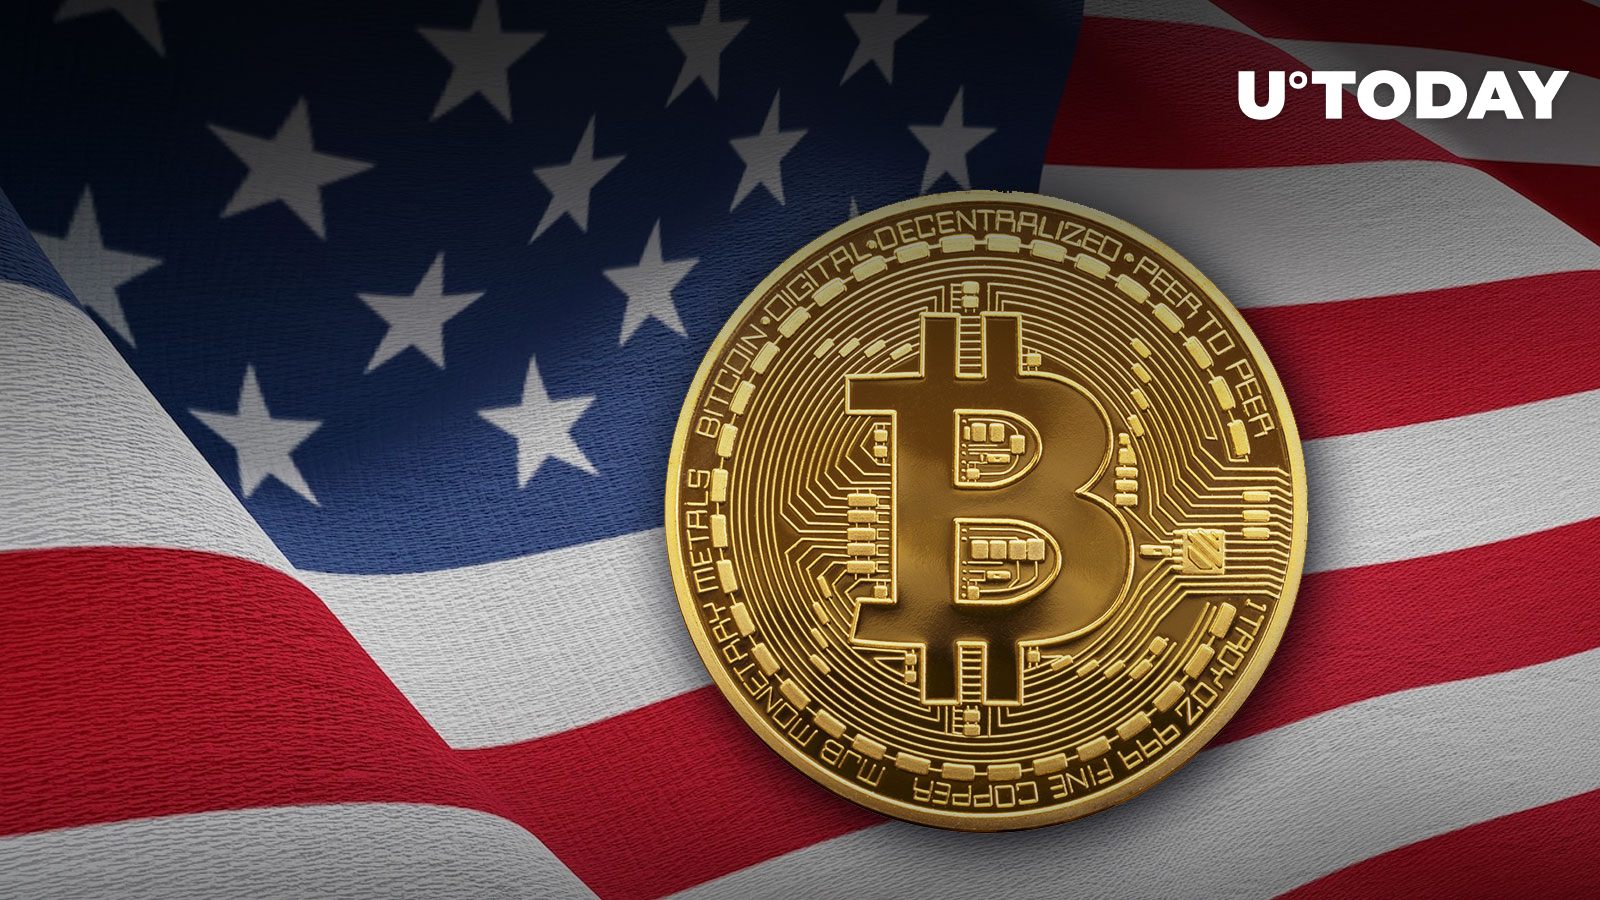 US Government Holds $5B in Bitcoin: WSJ